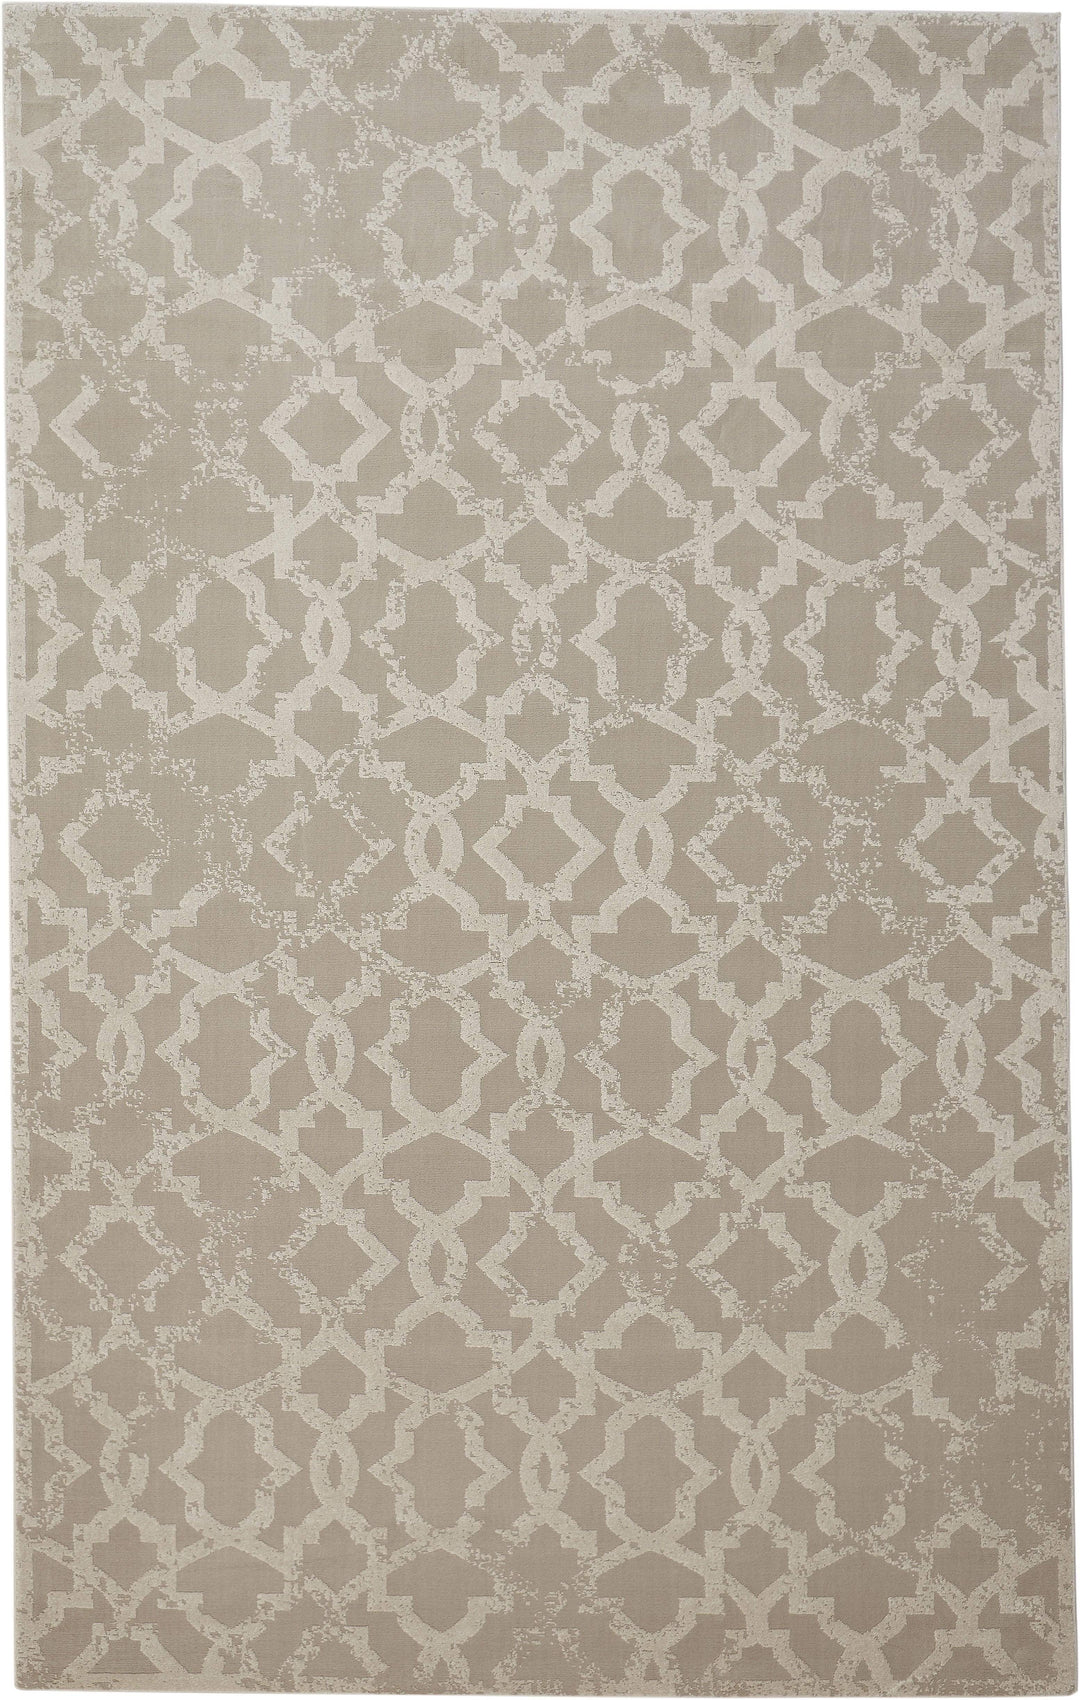 Feizy Feizy Akhari Trellis Pattern Rug - Available in 5 Sizes - Ivory & Champagne Gold 5' x 8' 6713675FIVY000E10